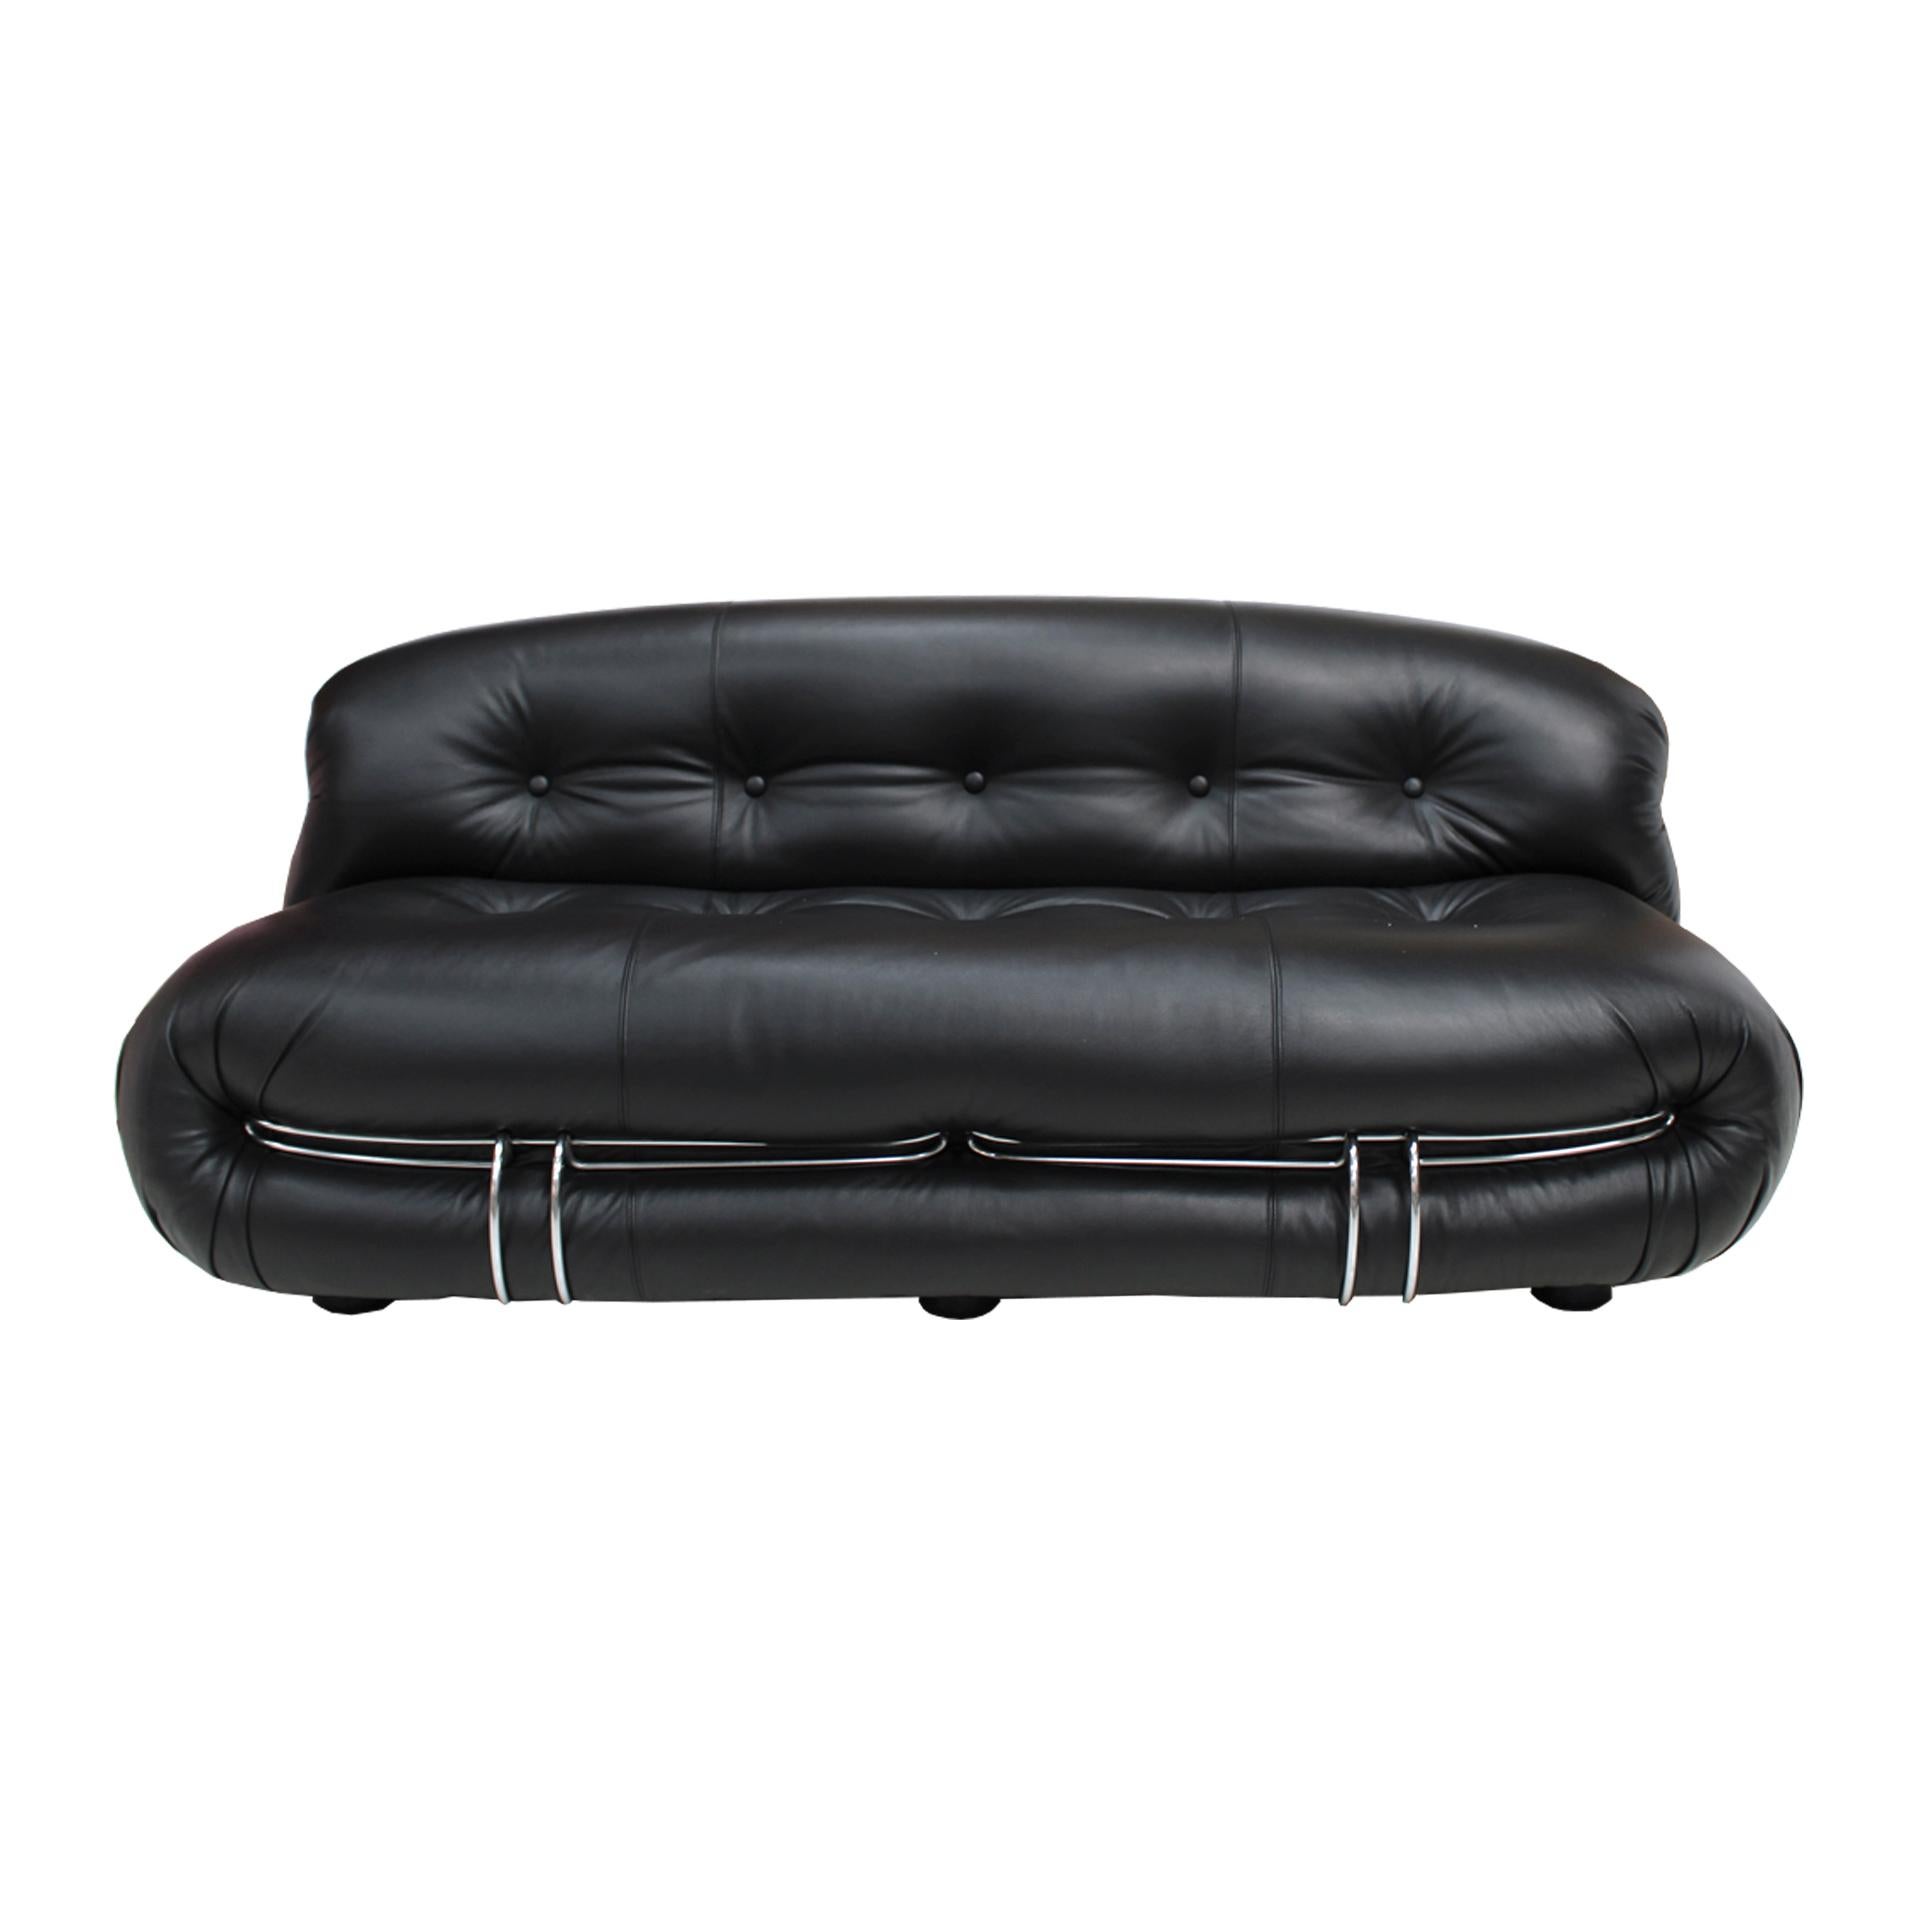 The Soriana sofa, designed by Tobia Scarpa and edited by Cassina, is a remarkable piece of furniture that embodies the essence of Italian design from the 1960s. With its sleek steel structure and reupholstered black leather, this sofa effortlessly